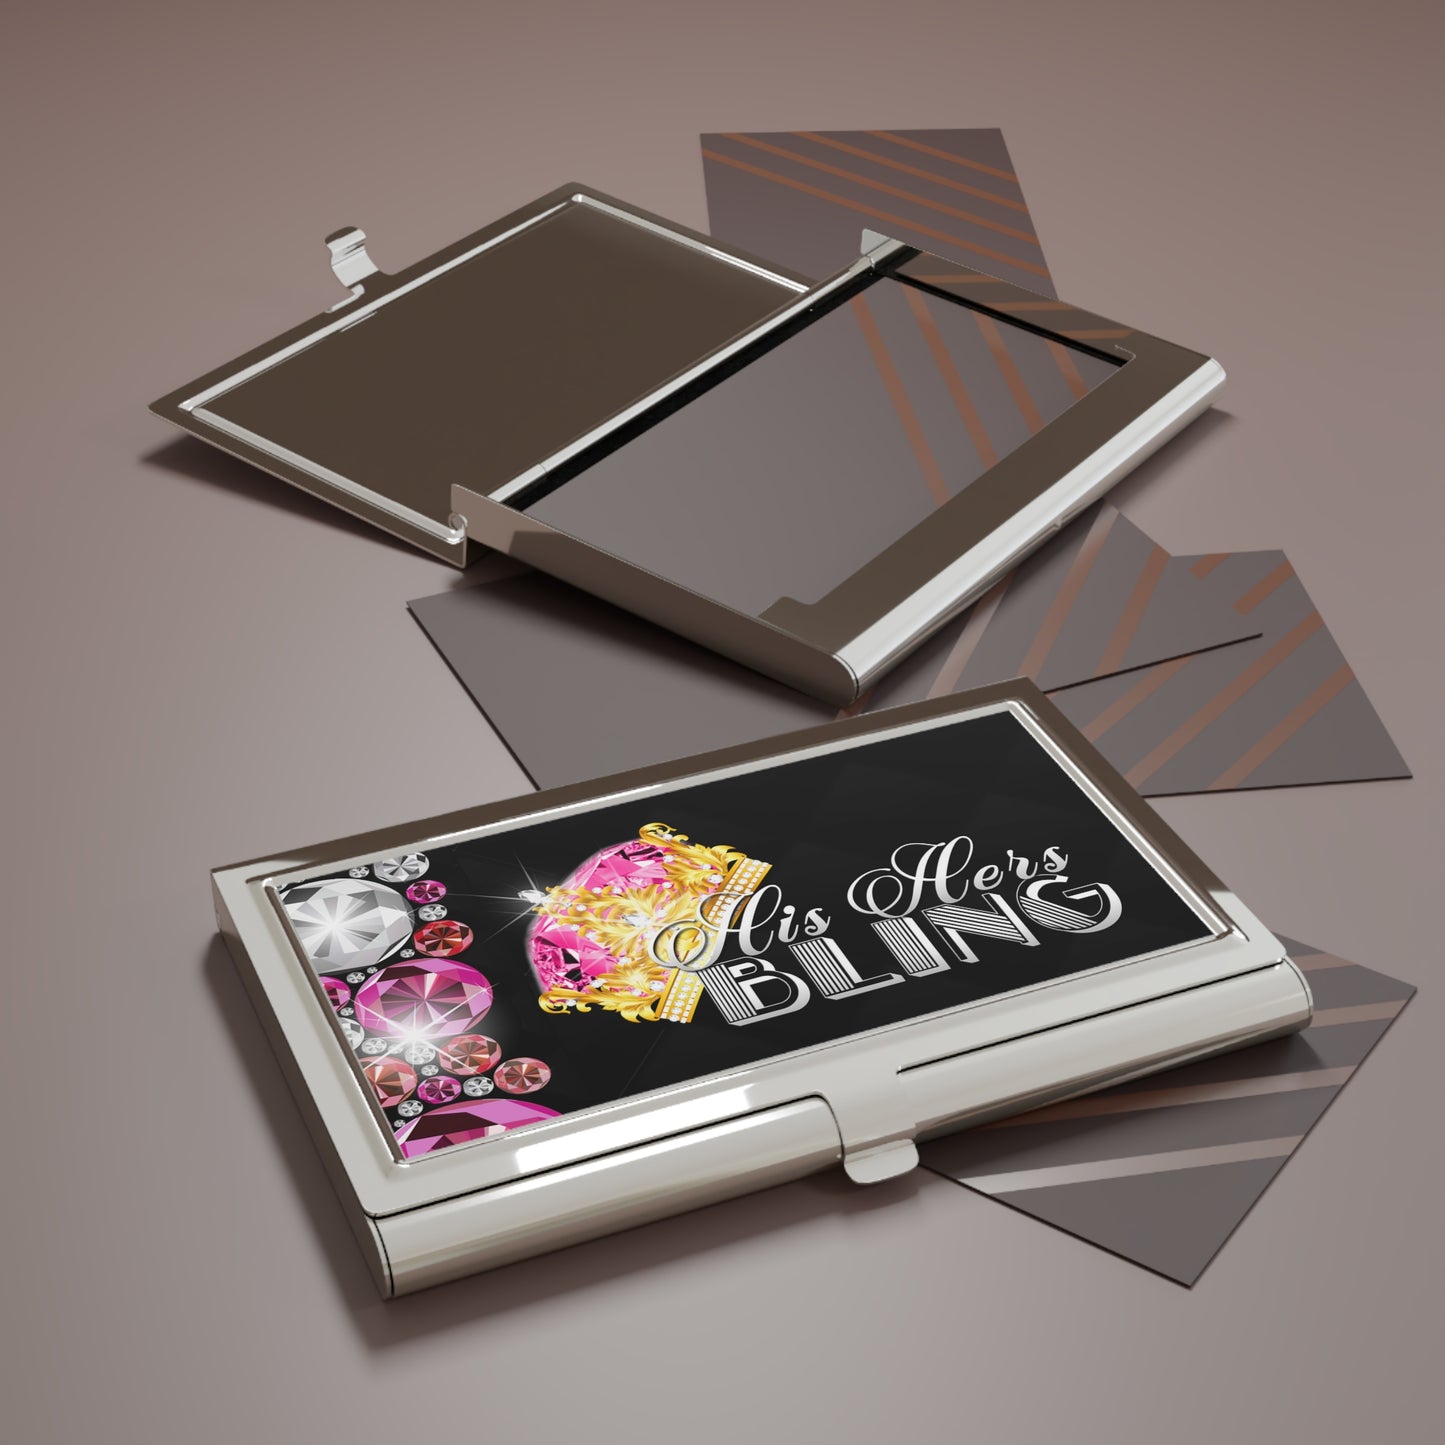 Bling Business Card Holder - GEMZ - HIS HERS